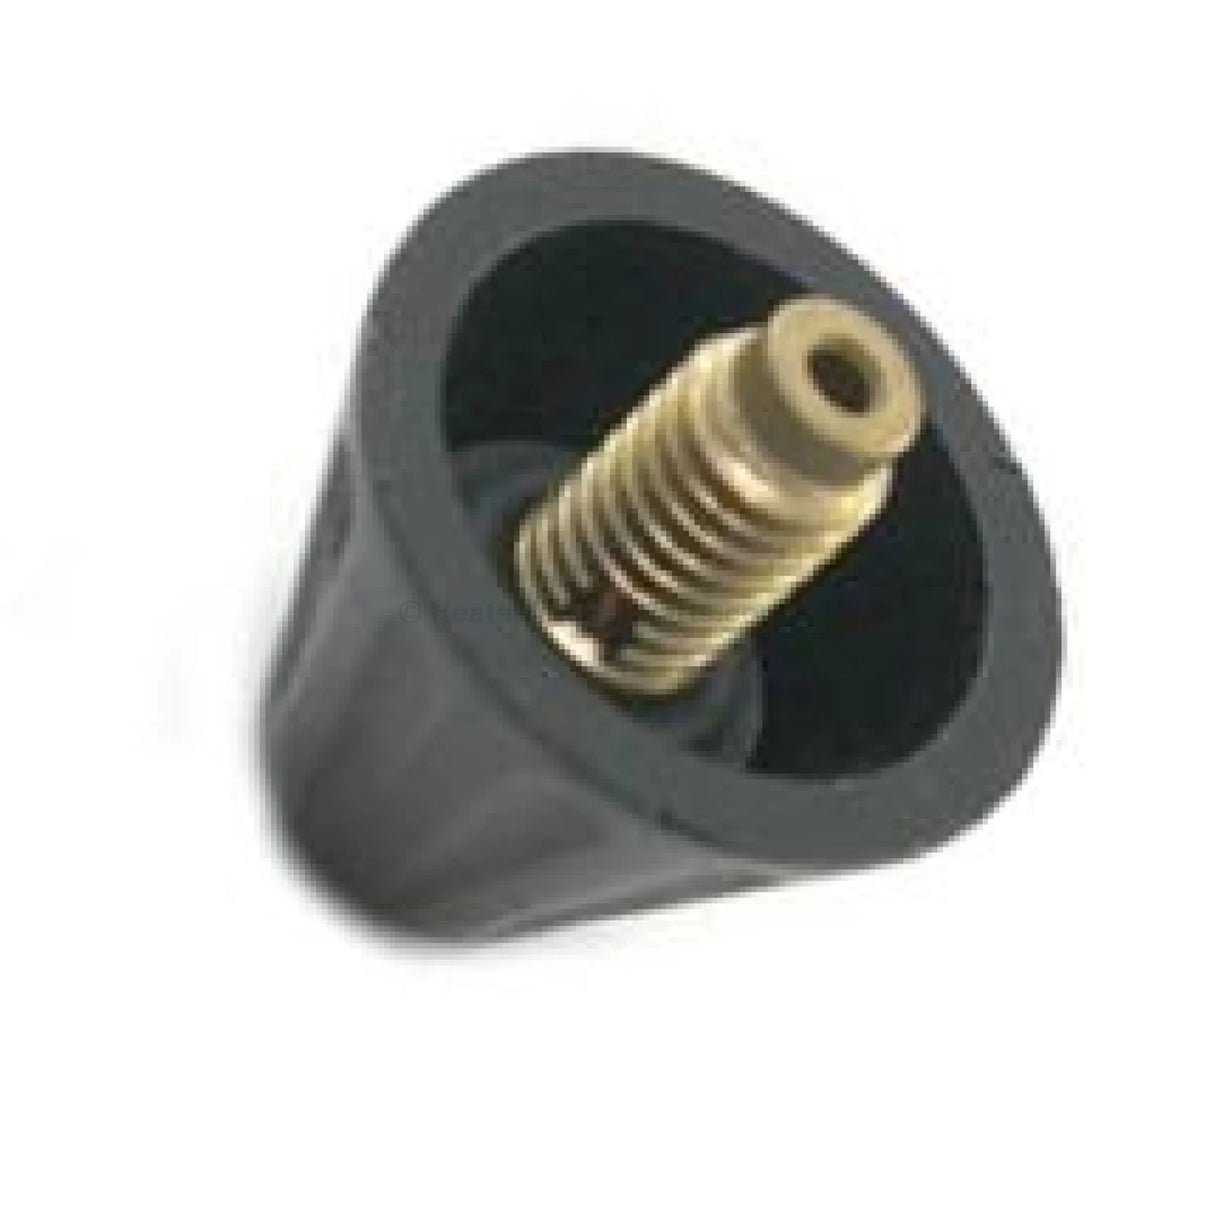 Dega / Quiptron / Onga Air Relese Valve - Cone Shaped - Heater and Spa Parts